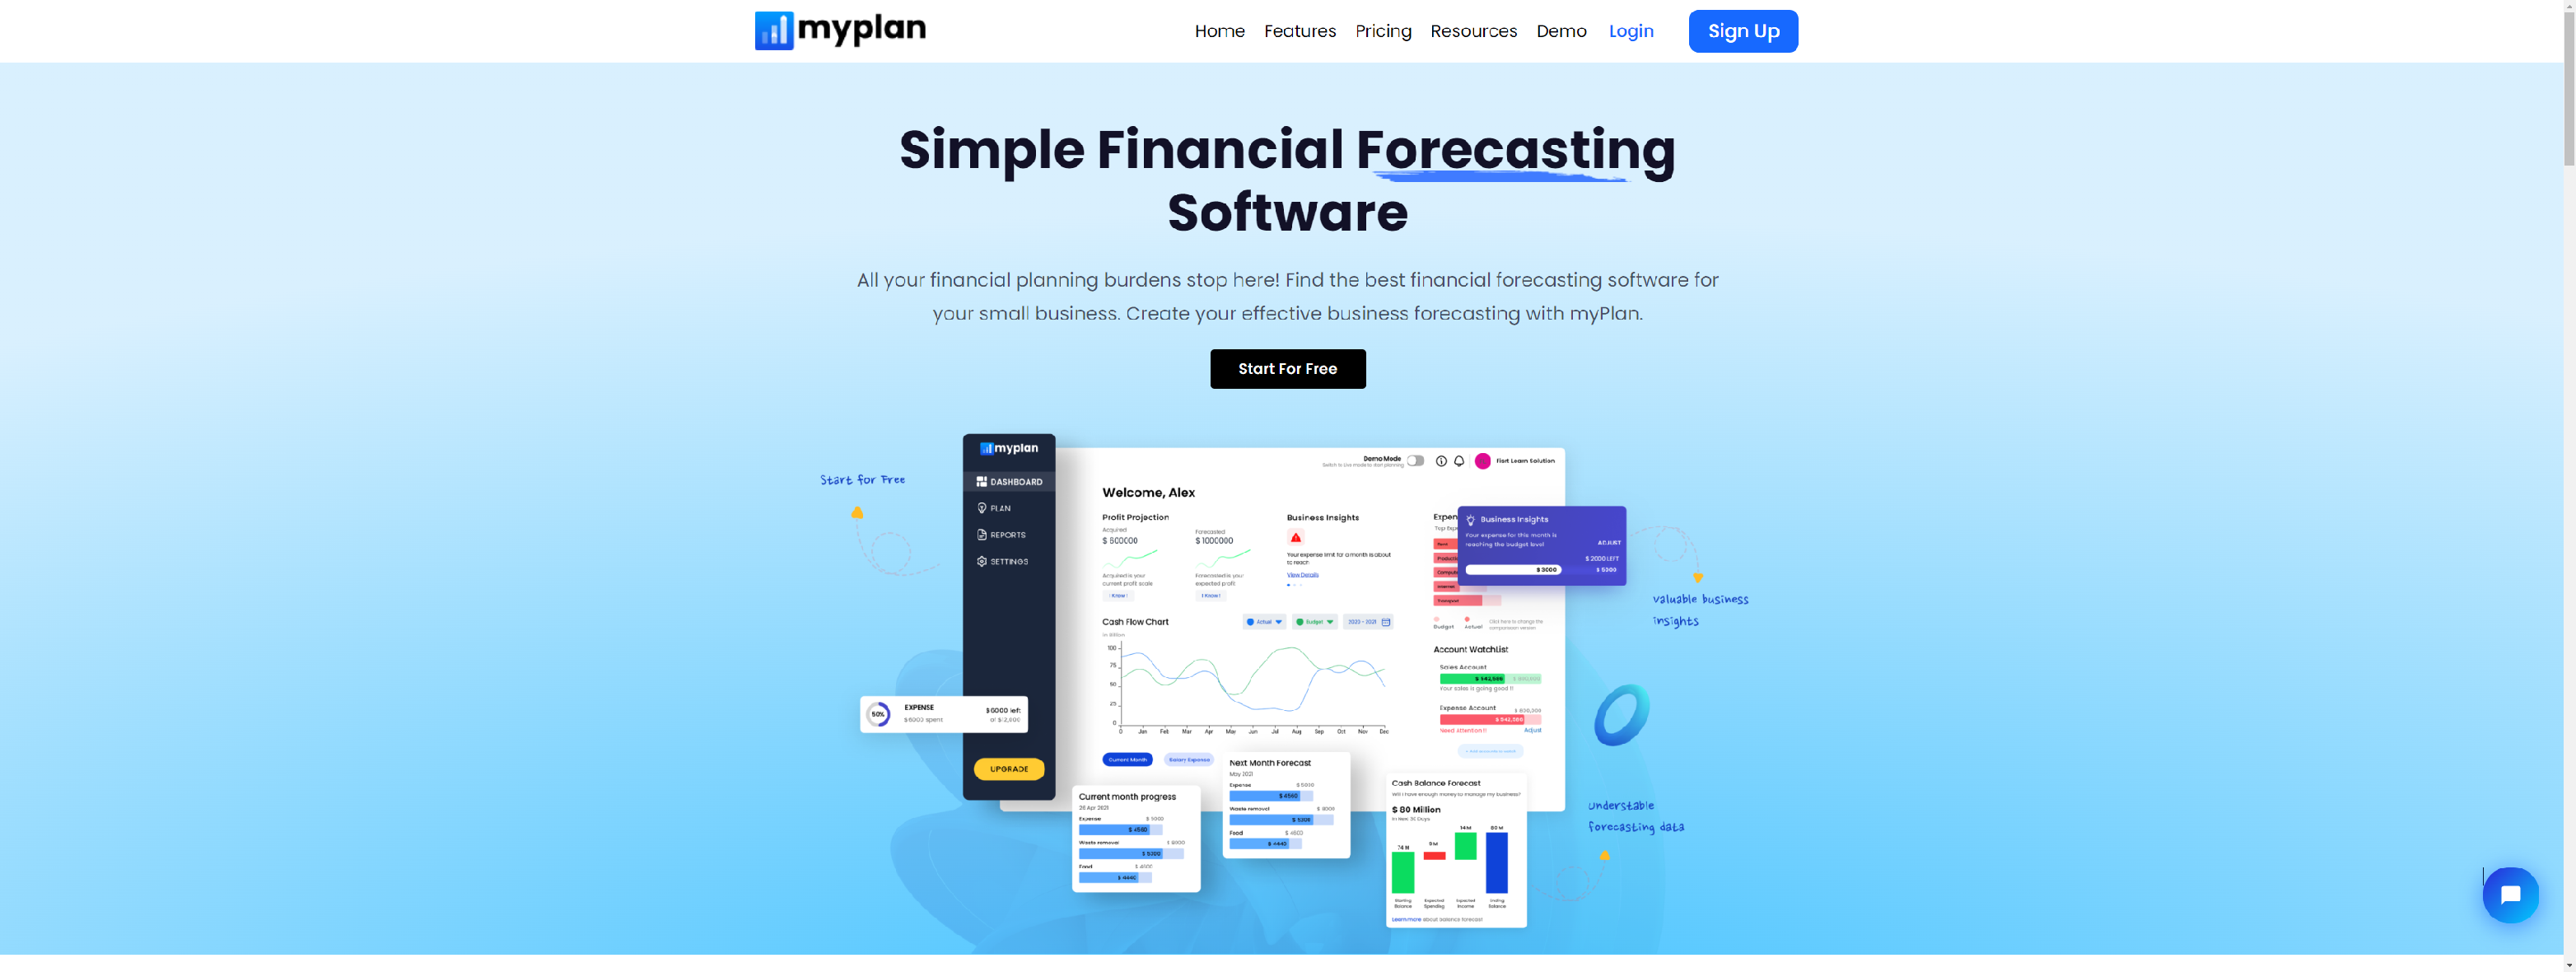 Financial Forecasting Software Budgeting Software For Small Business MyPlan Zetran 